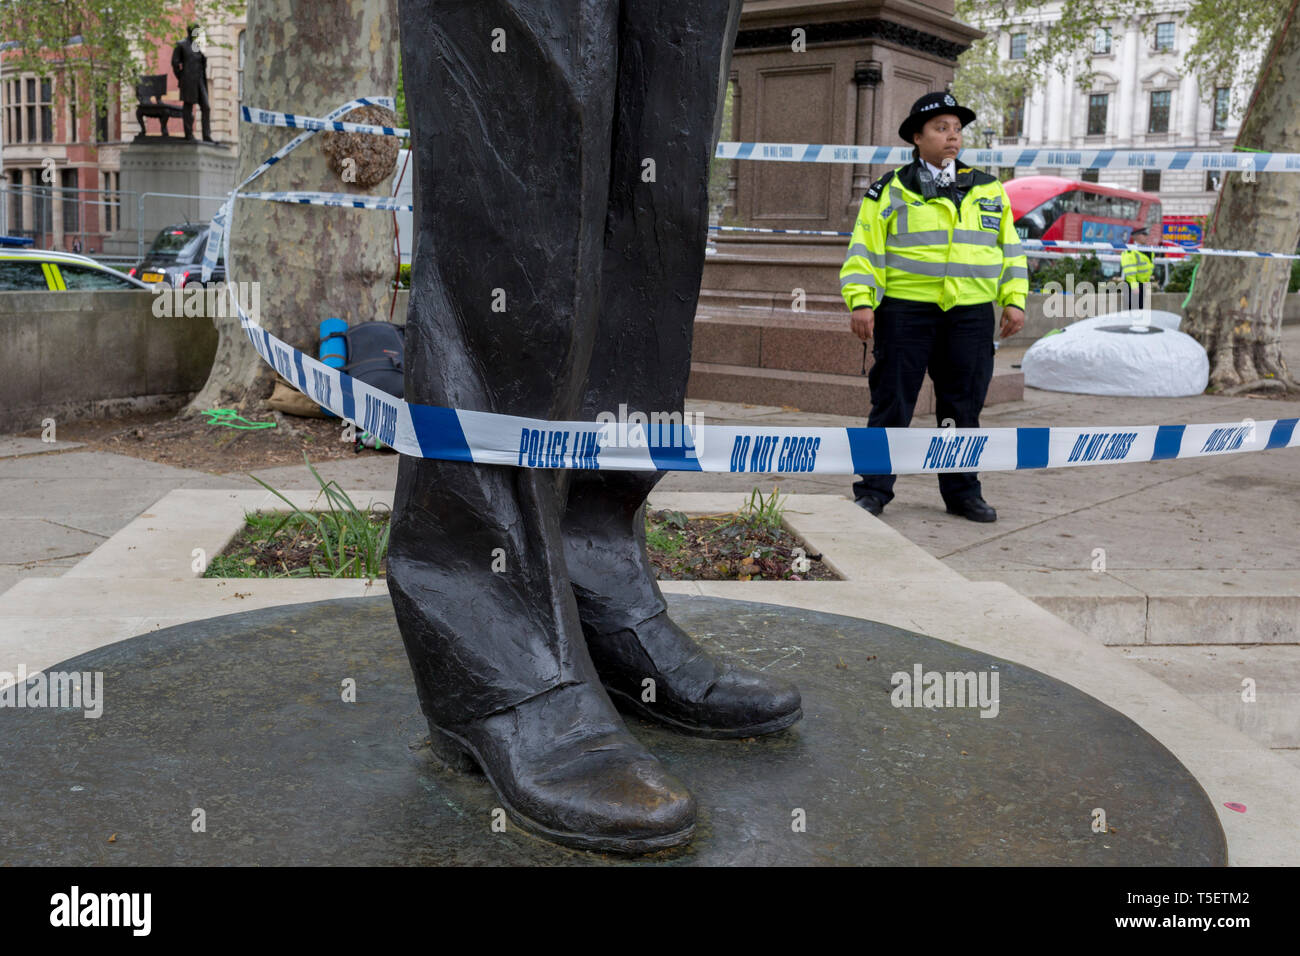 On the 10th consecutive day of protests around London by the climate change campaign Extinction Rebellion, police tape wrapped around the statue of Nelson Mandela and bars entry beneath tree protesters, on 24th April 2019, in Parliament Square, Westminster, London England. Stock Photo